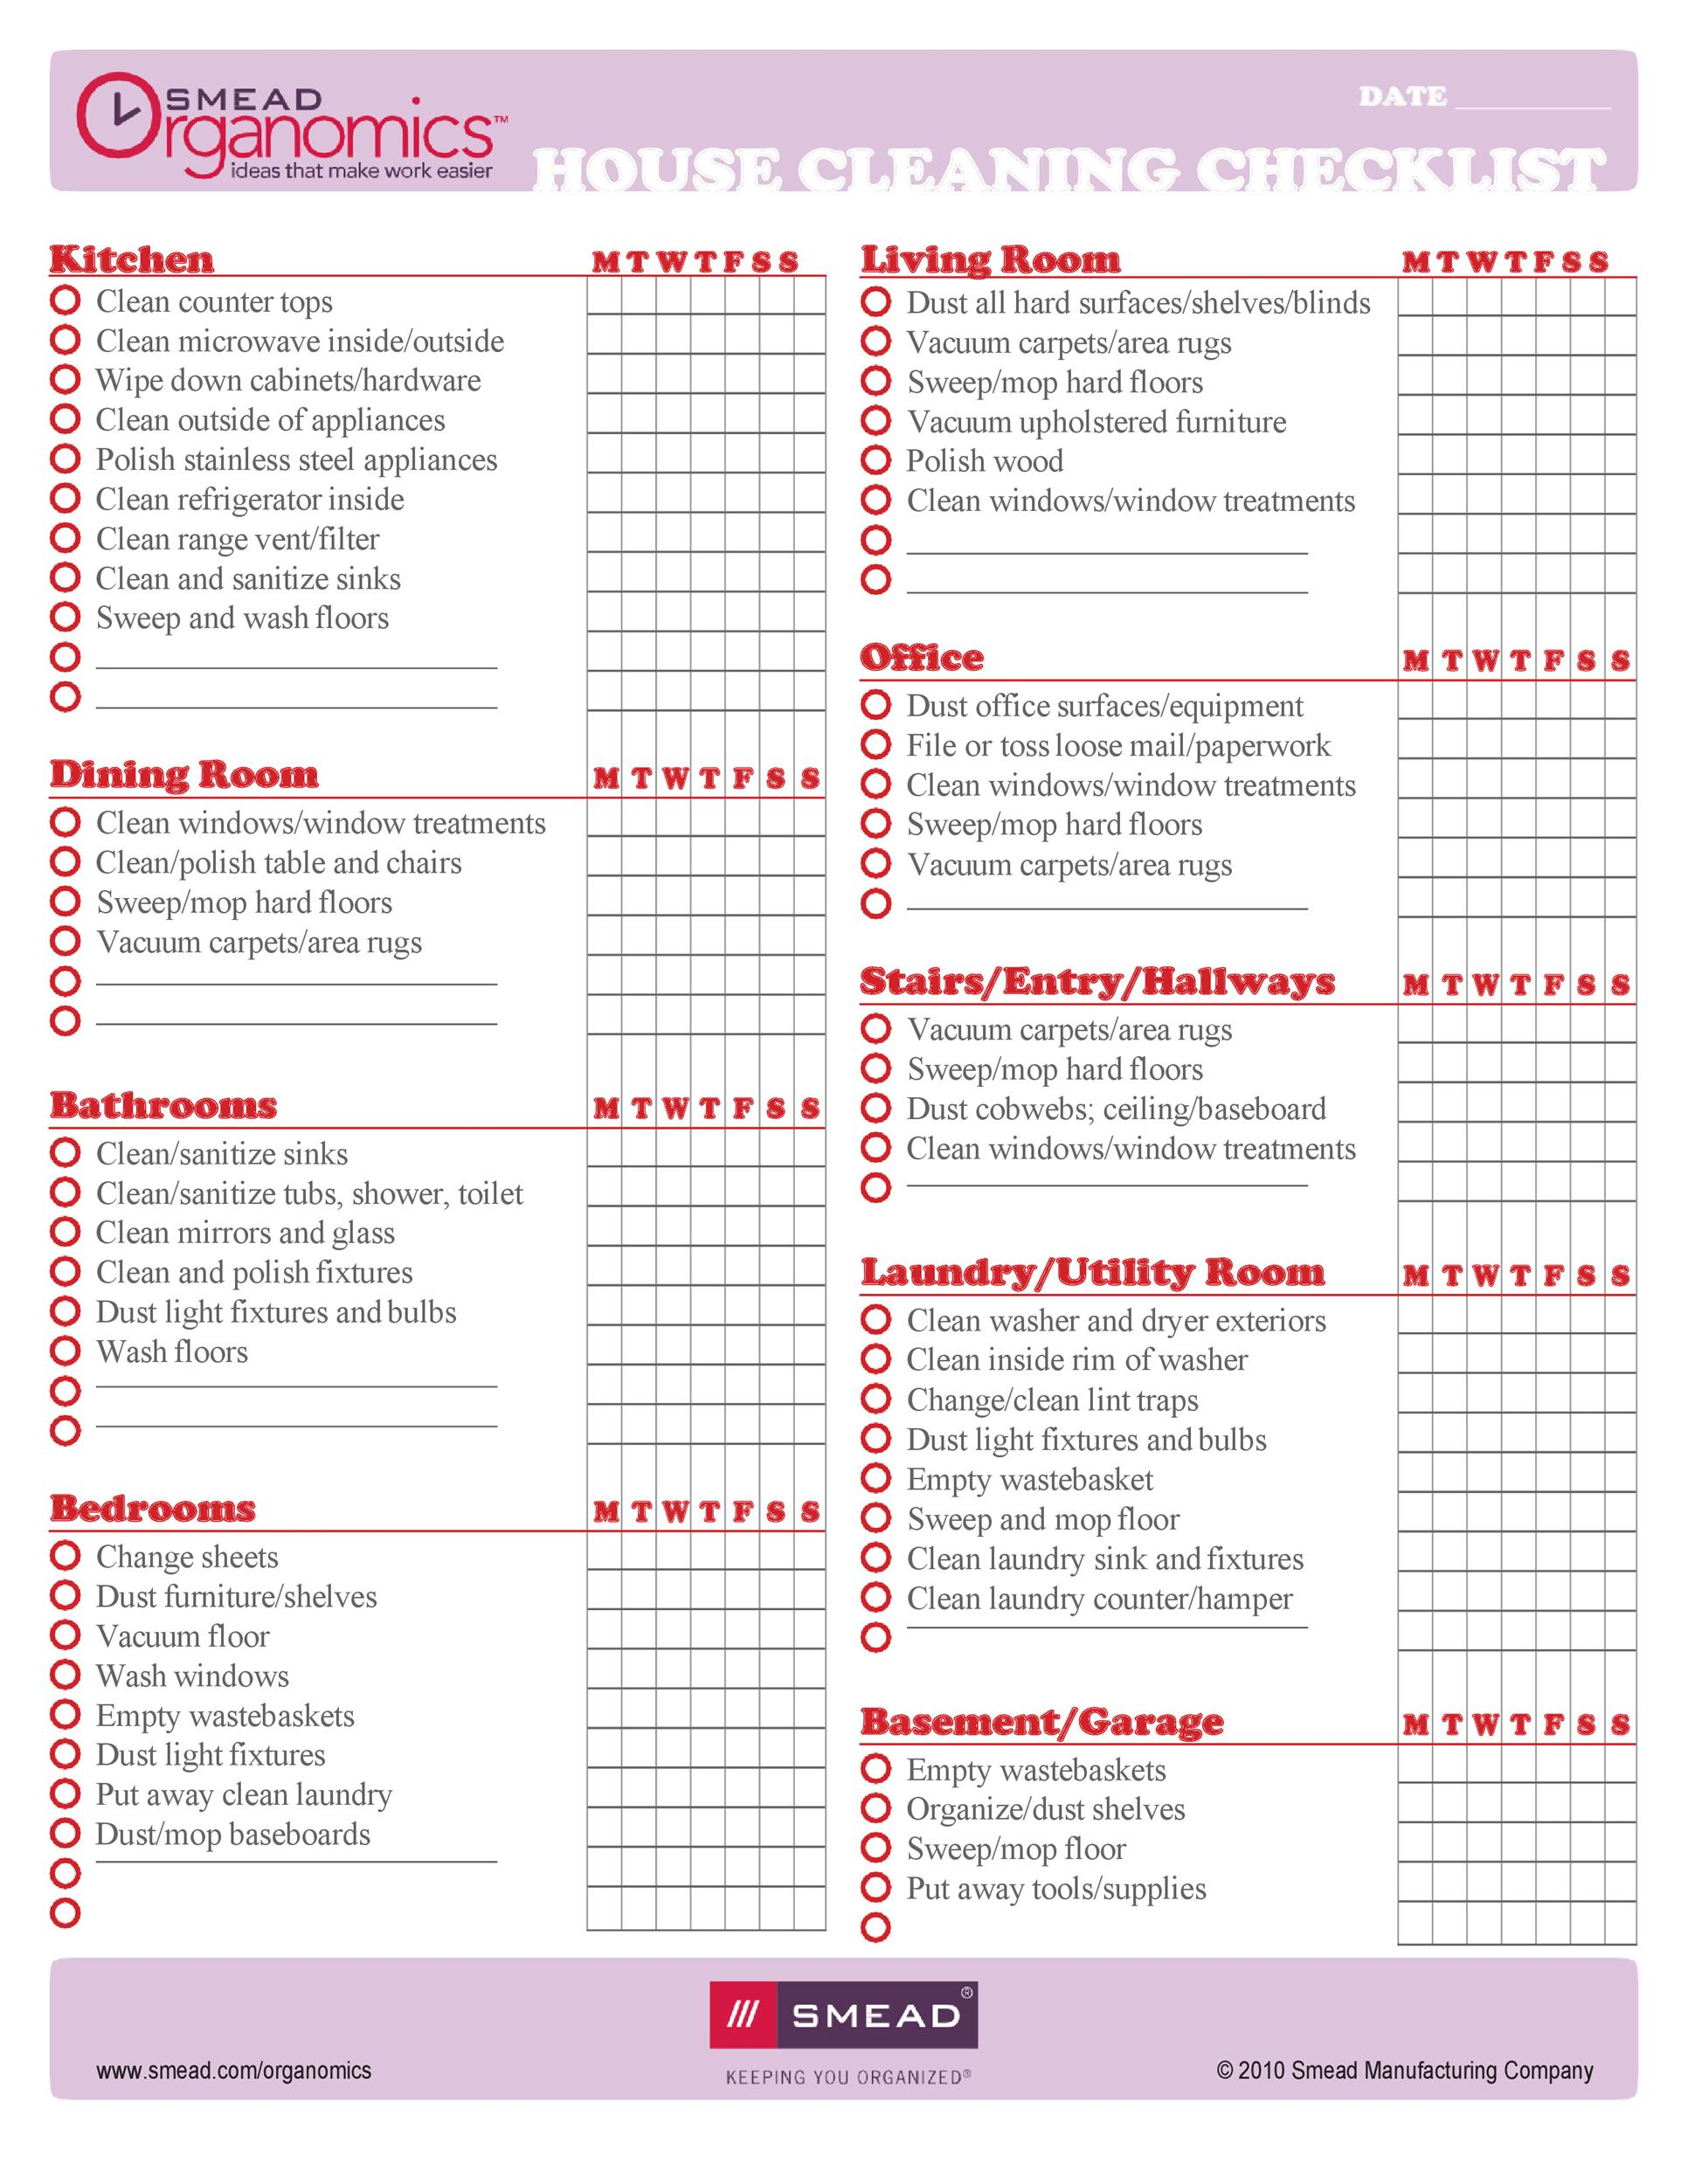 10 Printable House Cleaning Checklist Templates ᐅ TemplateLab With Home Cleaning Checklist Template Inside Home Cleaning Checklist Template